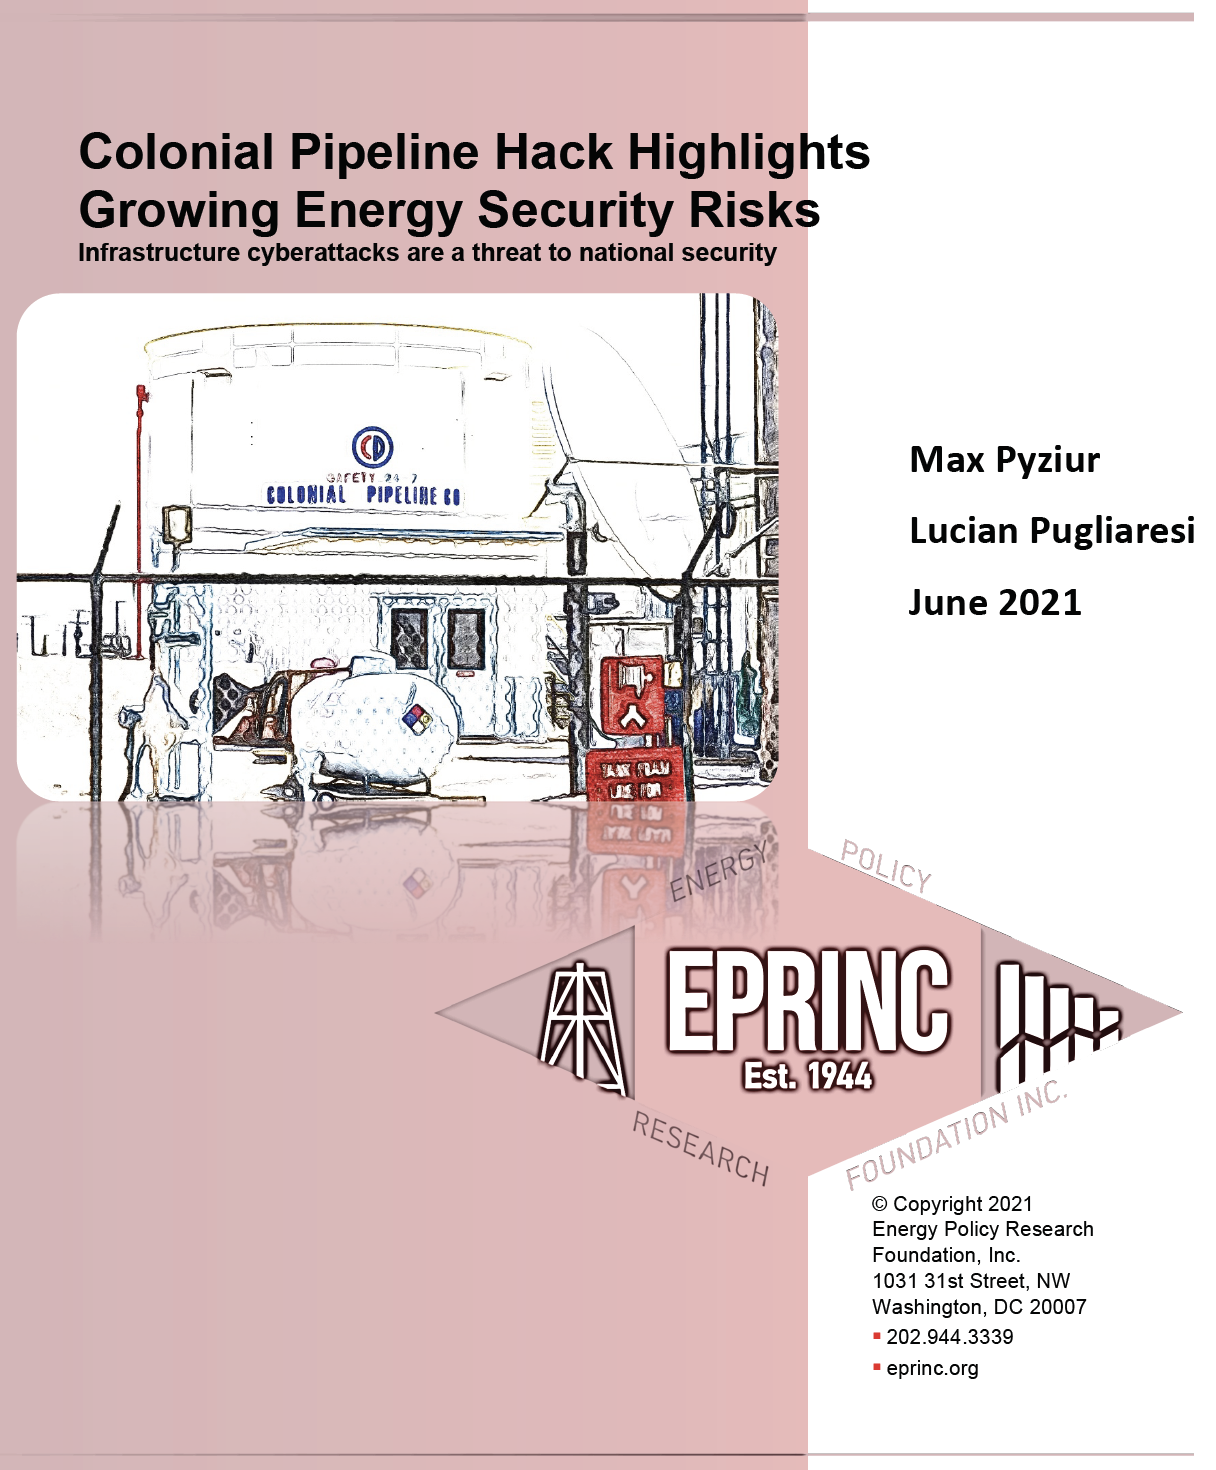 "Colonial Pipeline Hack Highlights Growing Energy Security Risks" Report by Lucian Pugliaresi and Max Pyziur